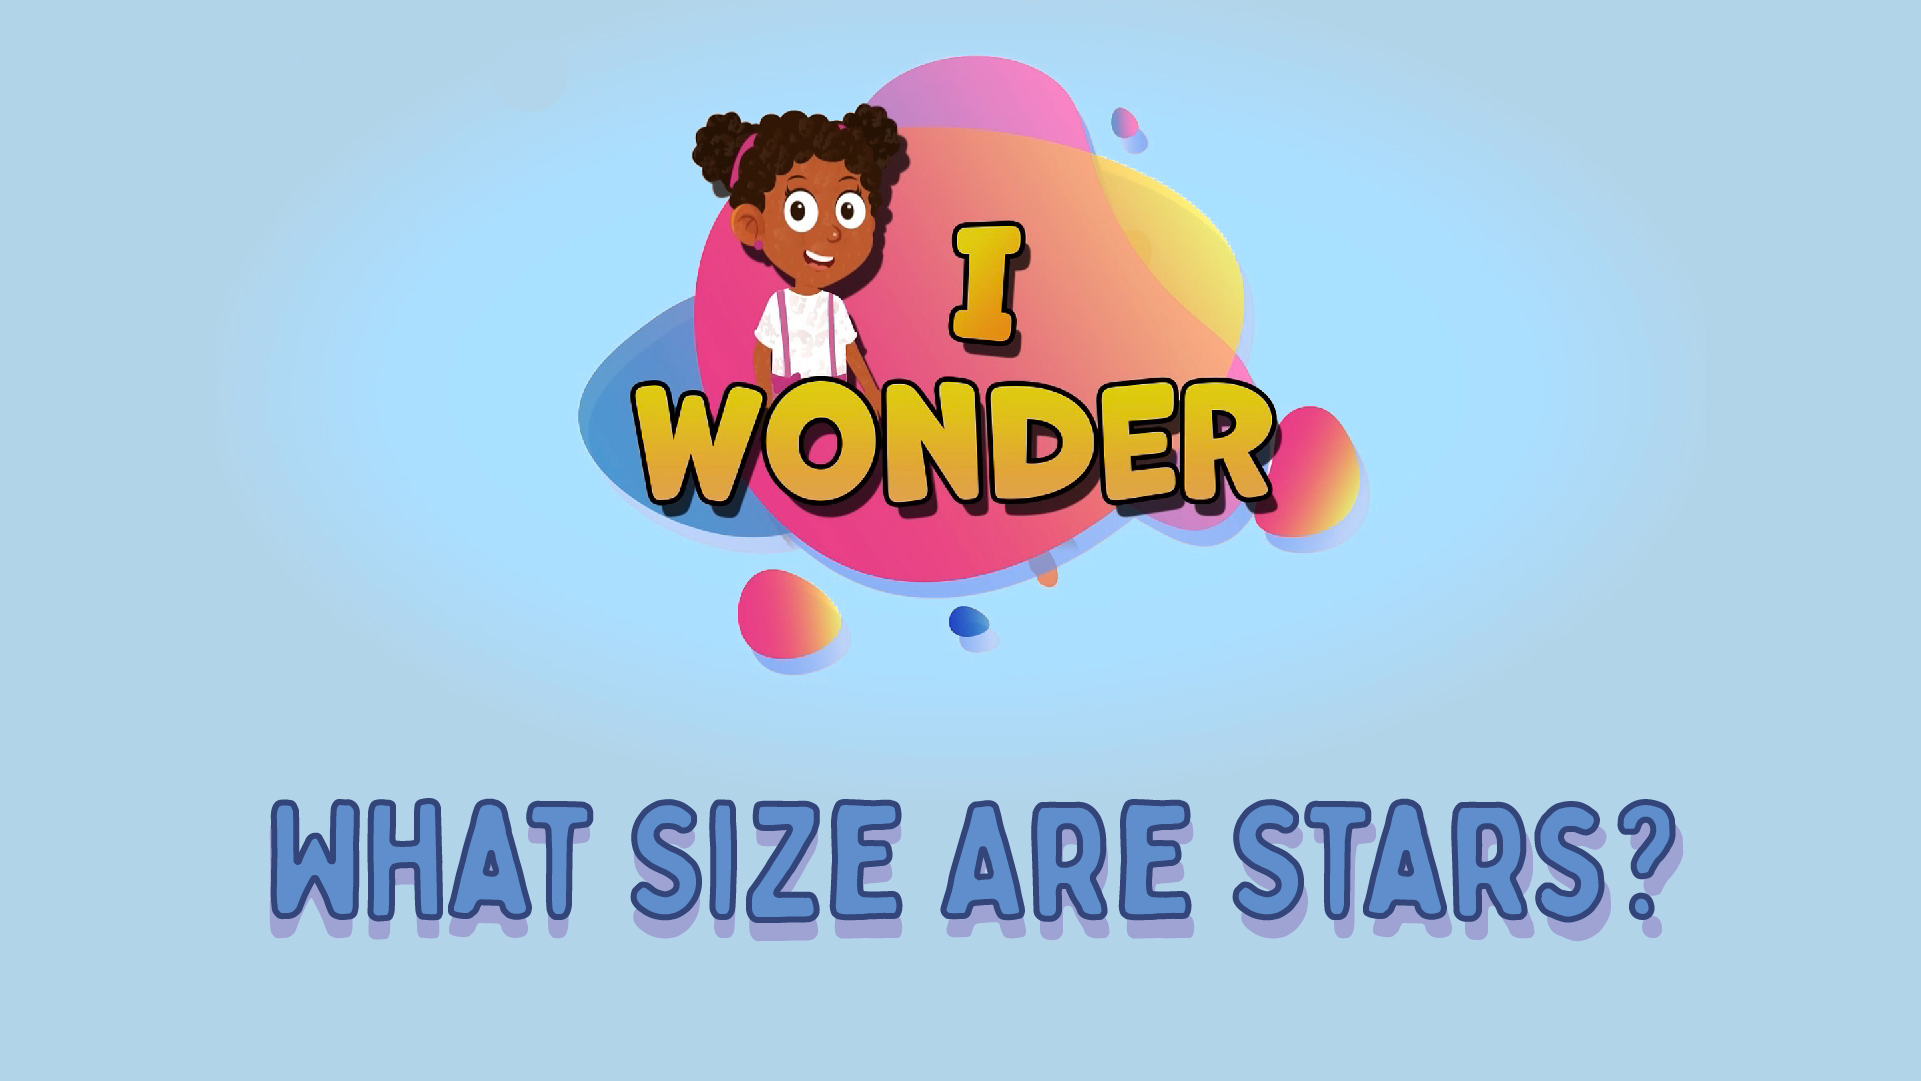 What Size Are Stars?